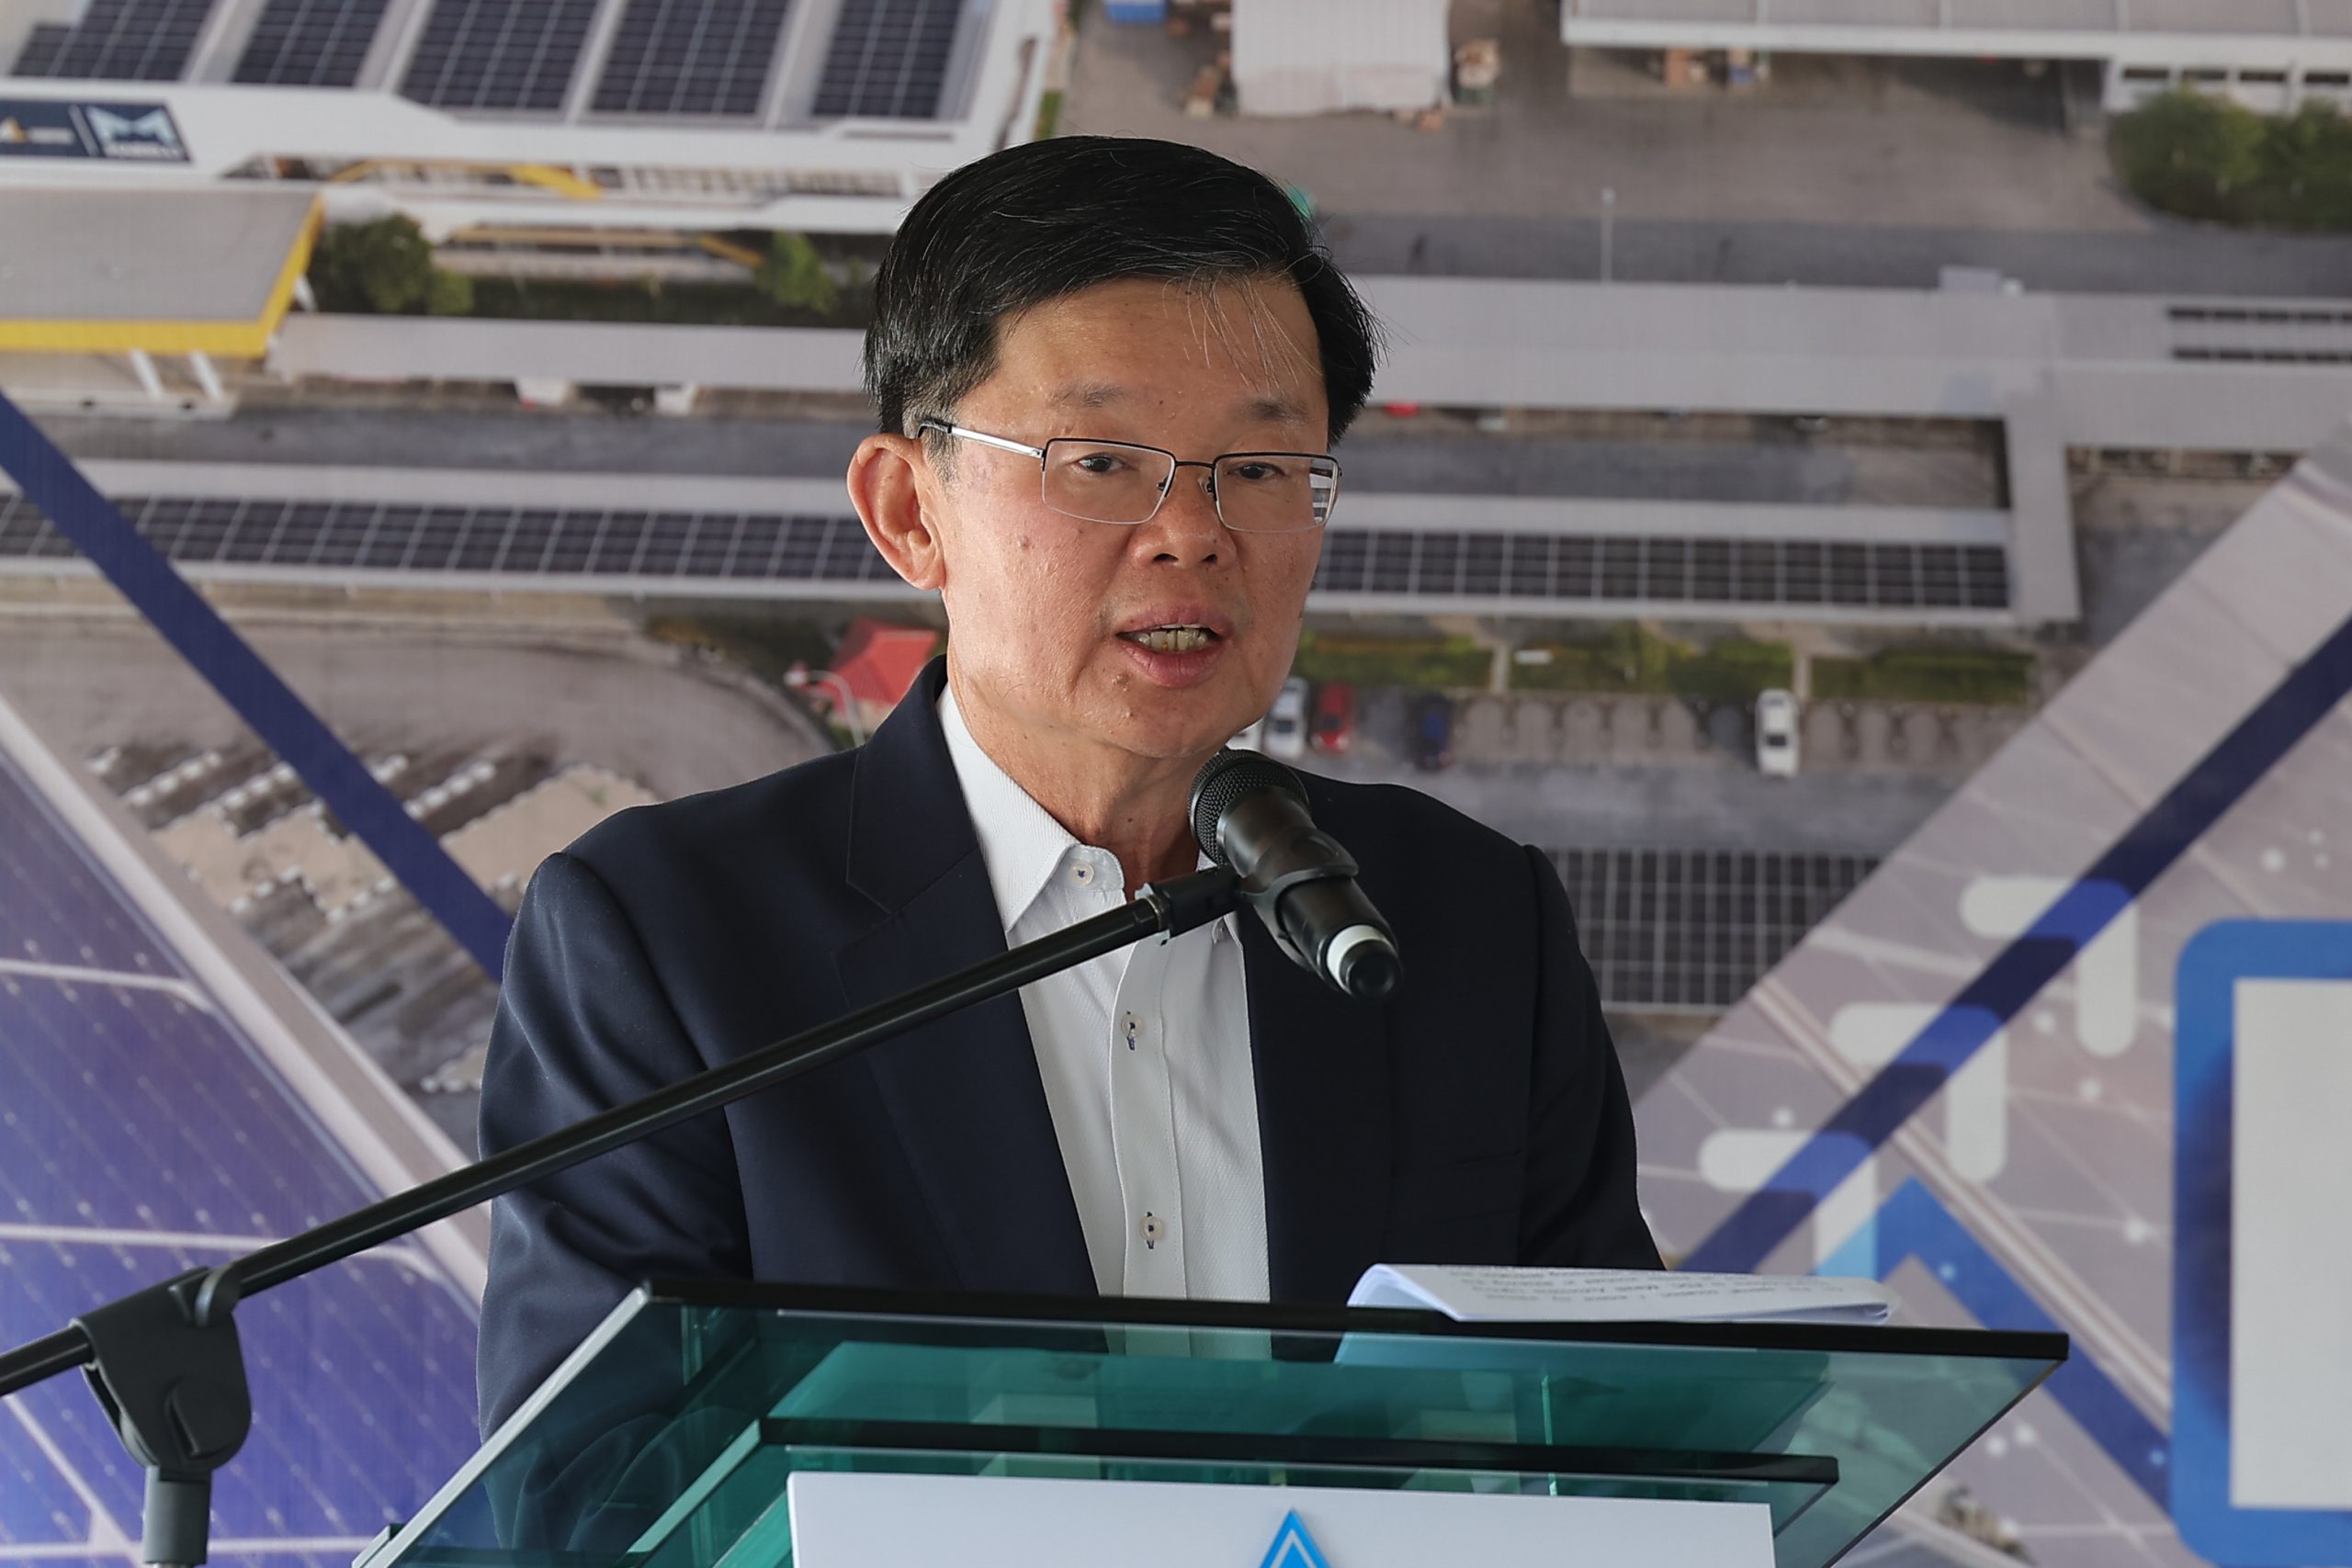 Continuous due diligence conducted over Umech land deal: Penang CM